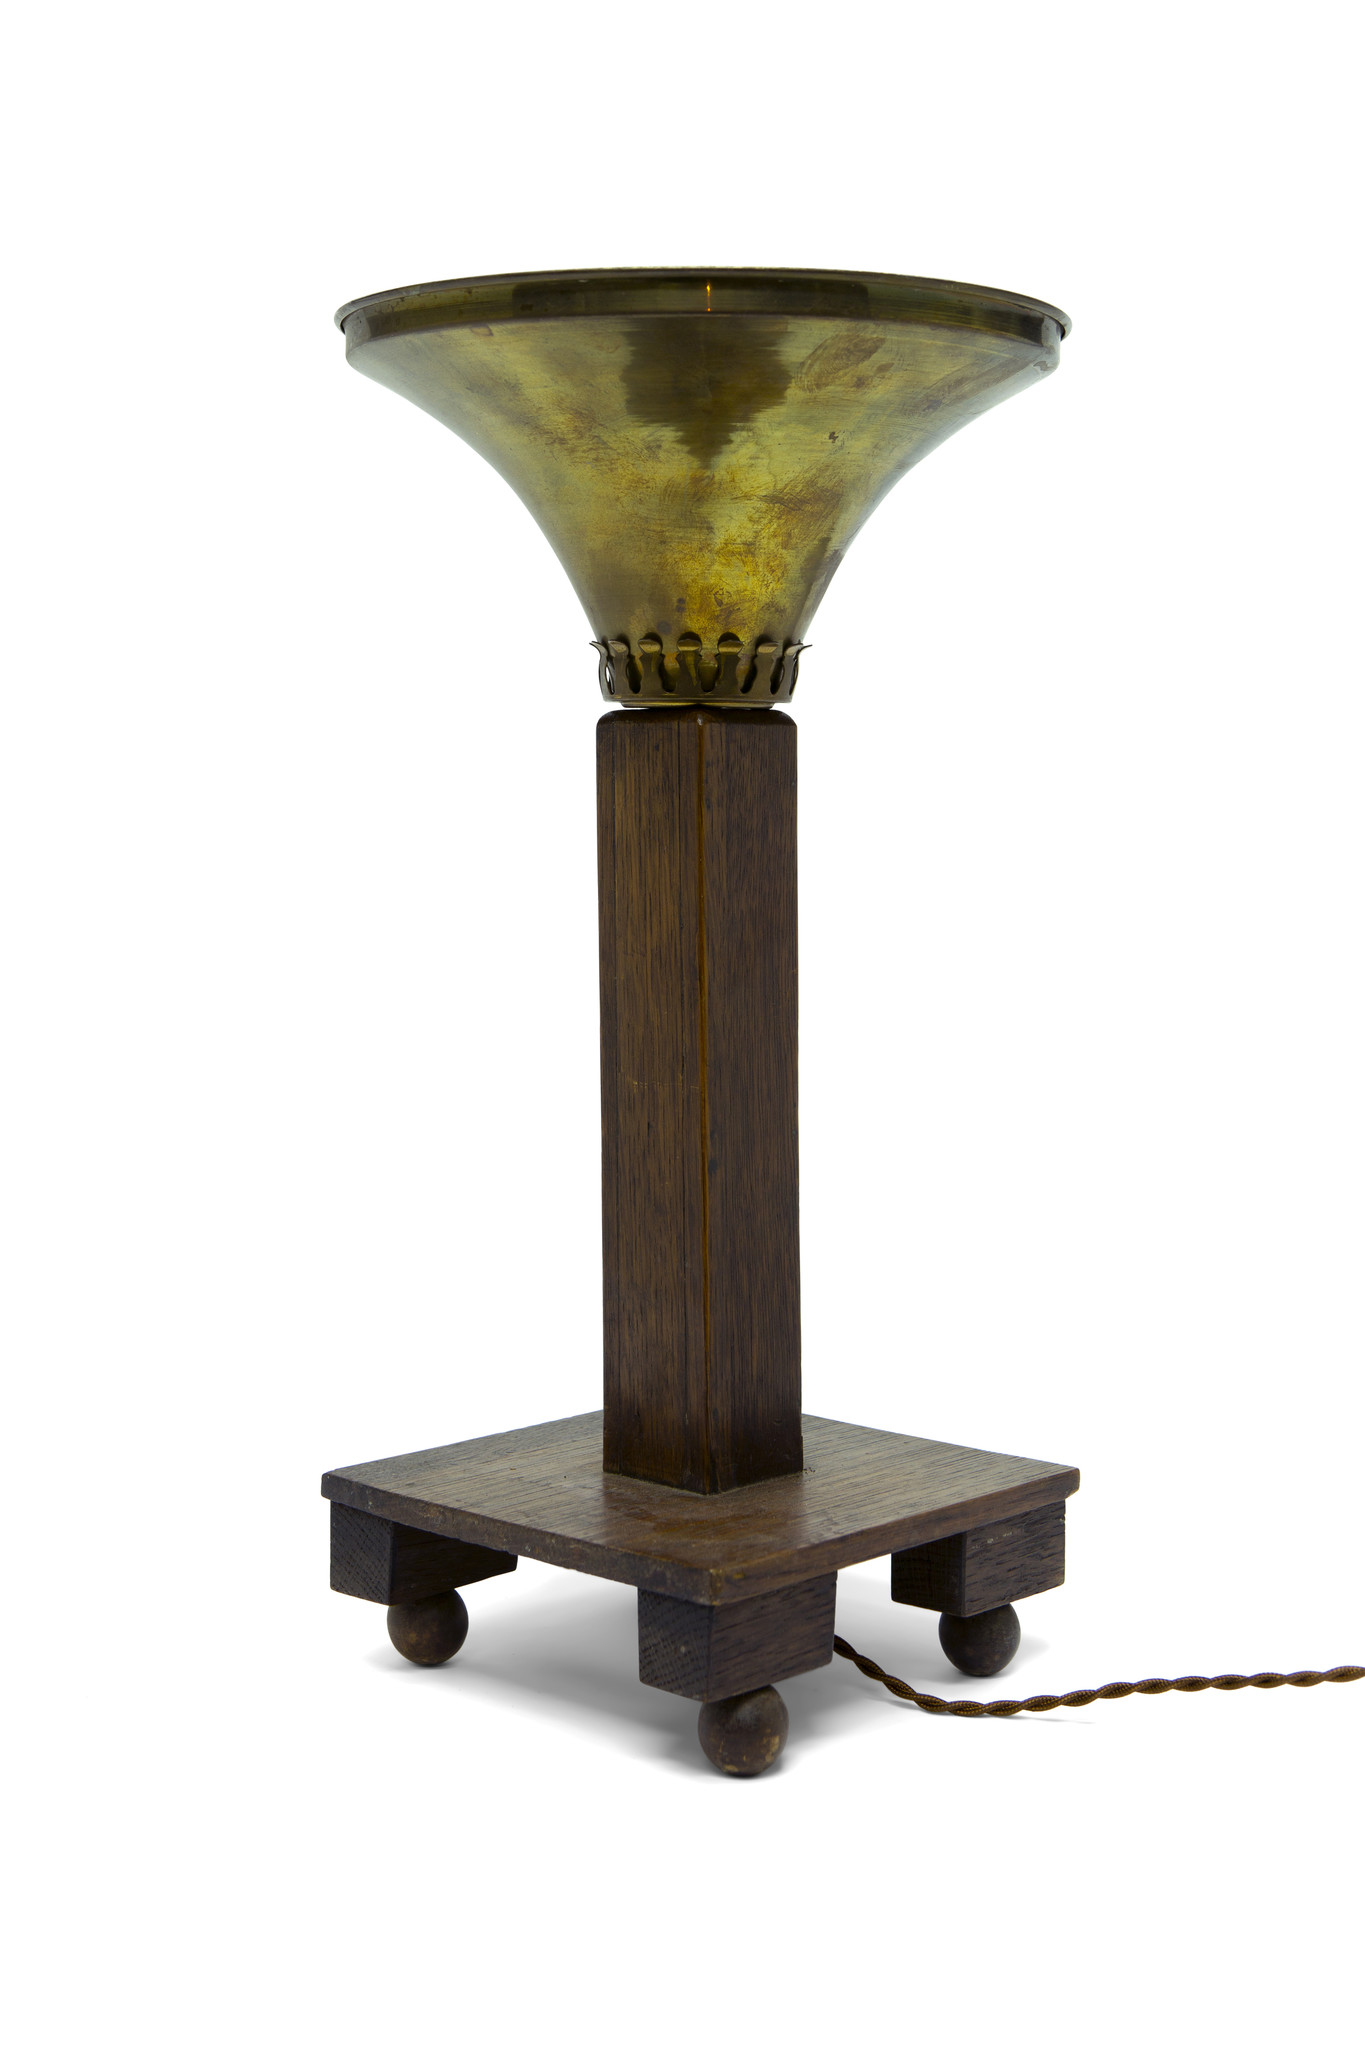 Geval software Koningin Old Table Lamp in Art Deco Style with Copper Lampshade, 1950s - Lamplord -  Vintage Lighting